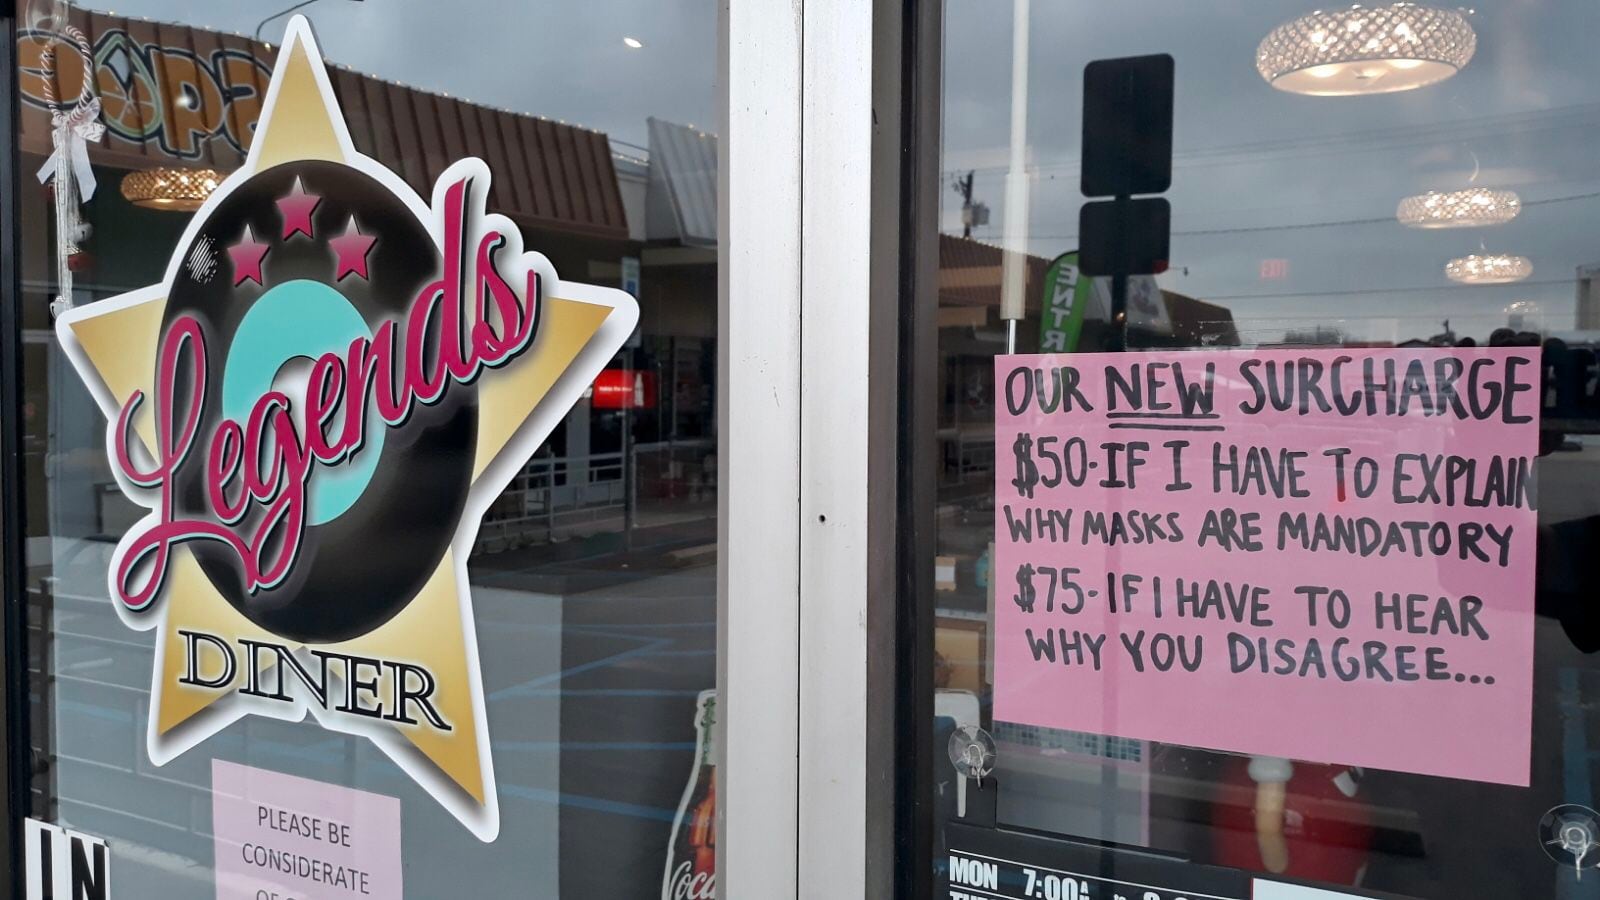 The co-owners of Legends Diner in Denton posted a sign on the restaurant in mid-March 2021,...